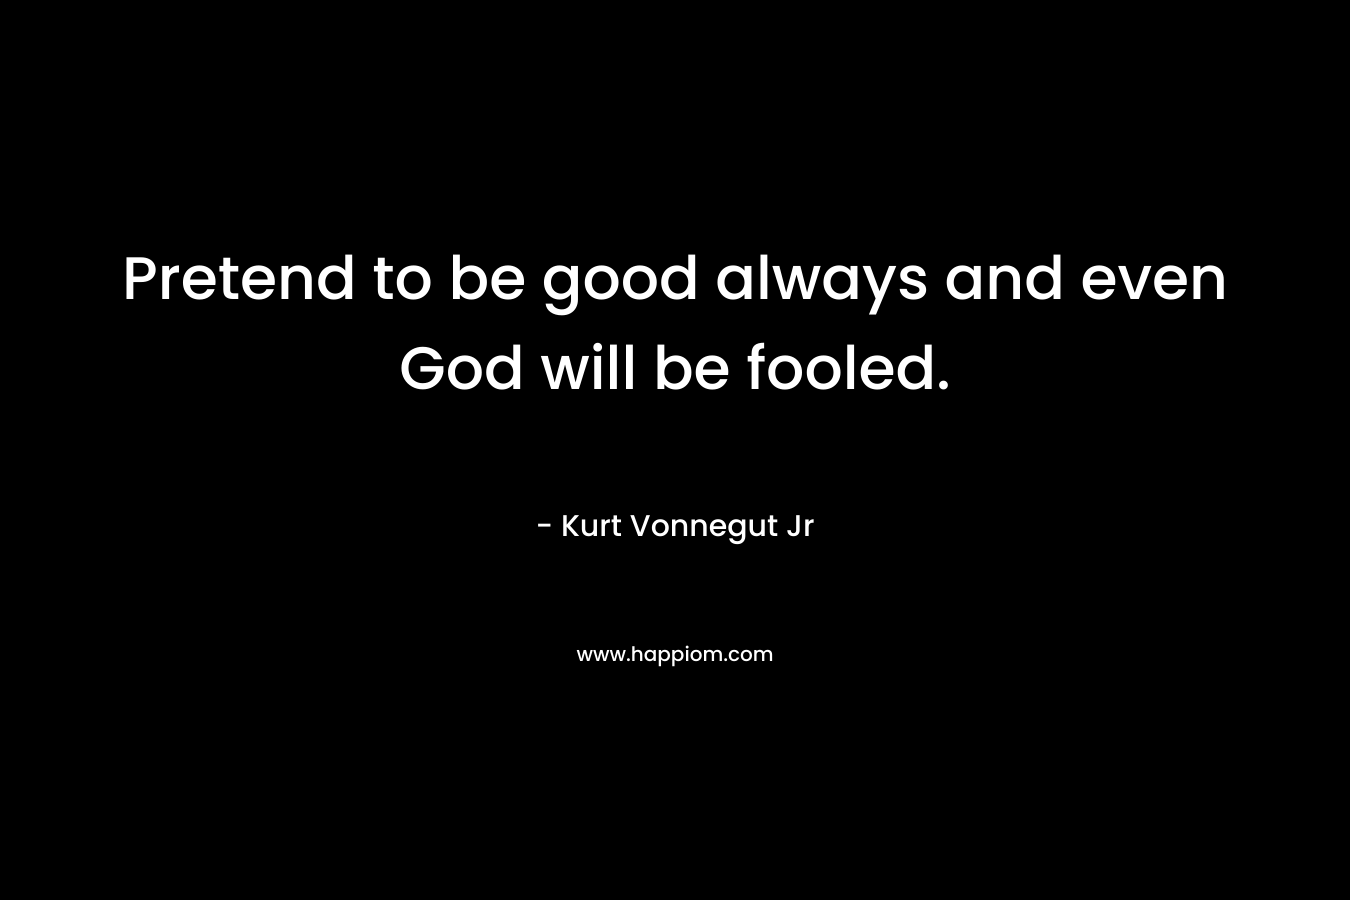 Pretend to be good always and even God will be fooled.